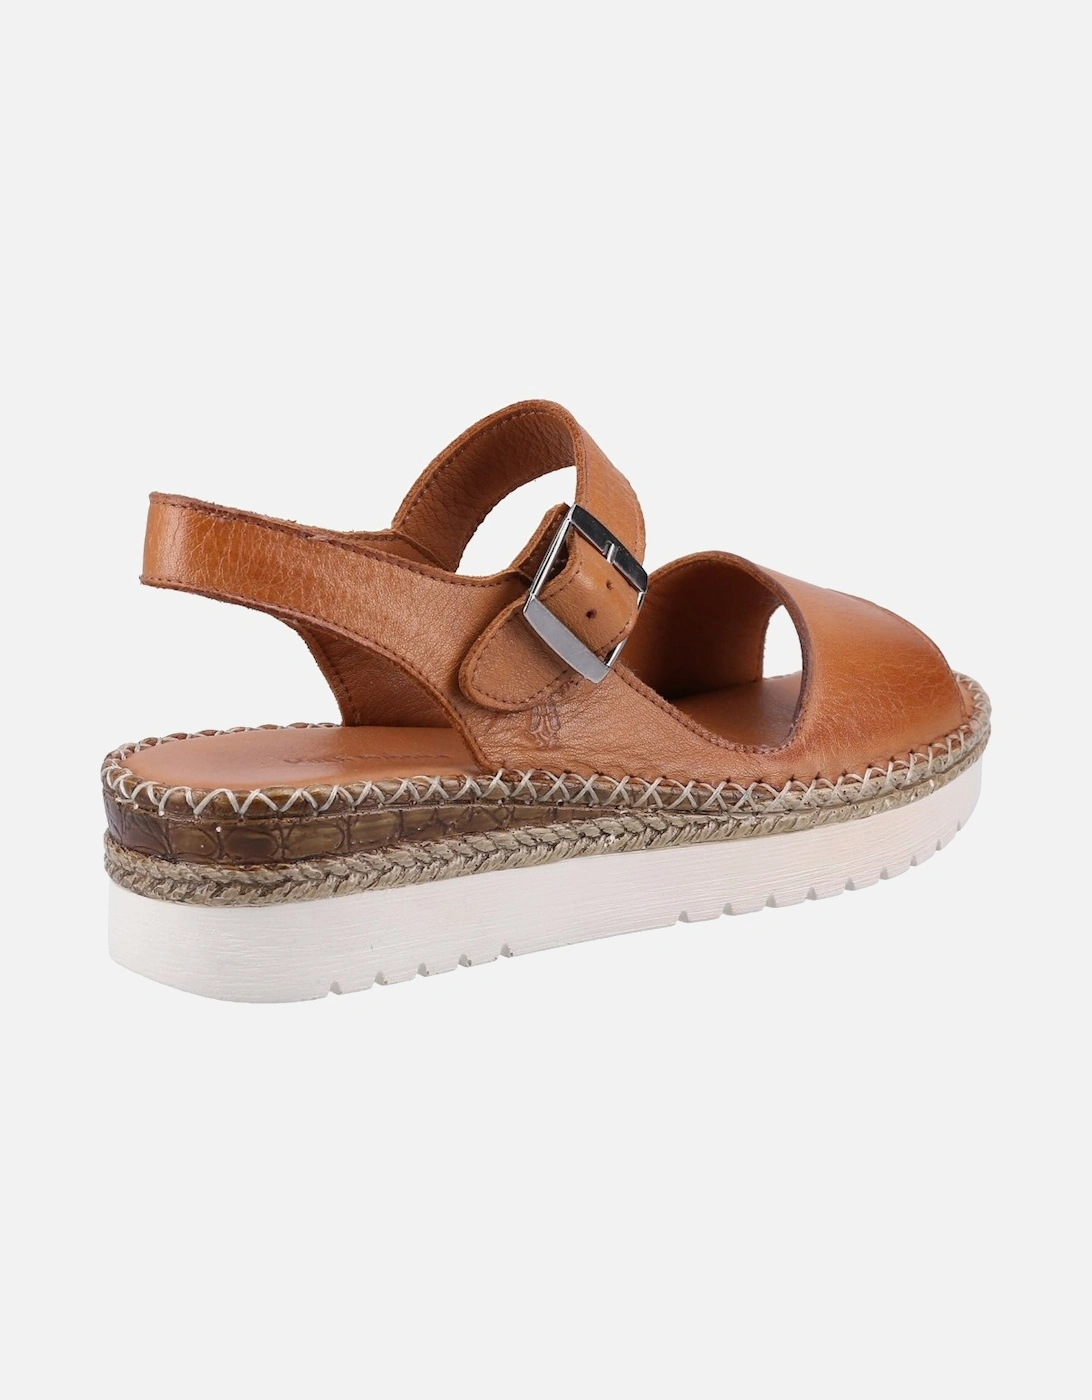 Stacey Womens Sandals